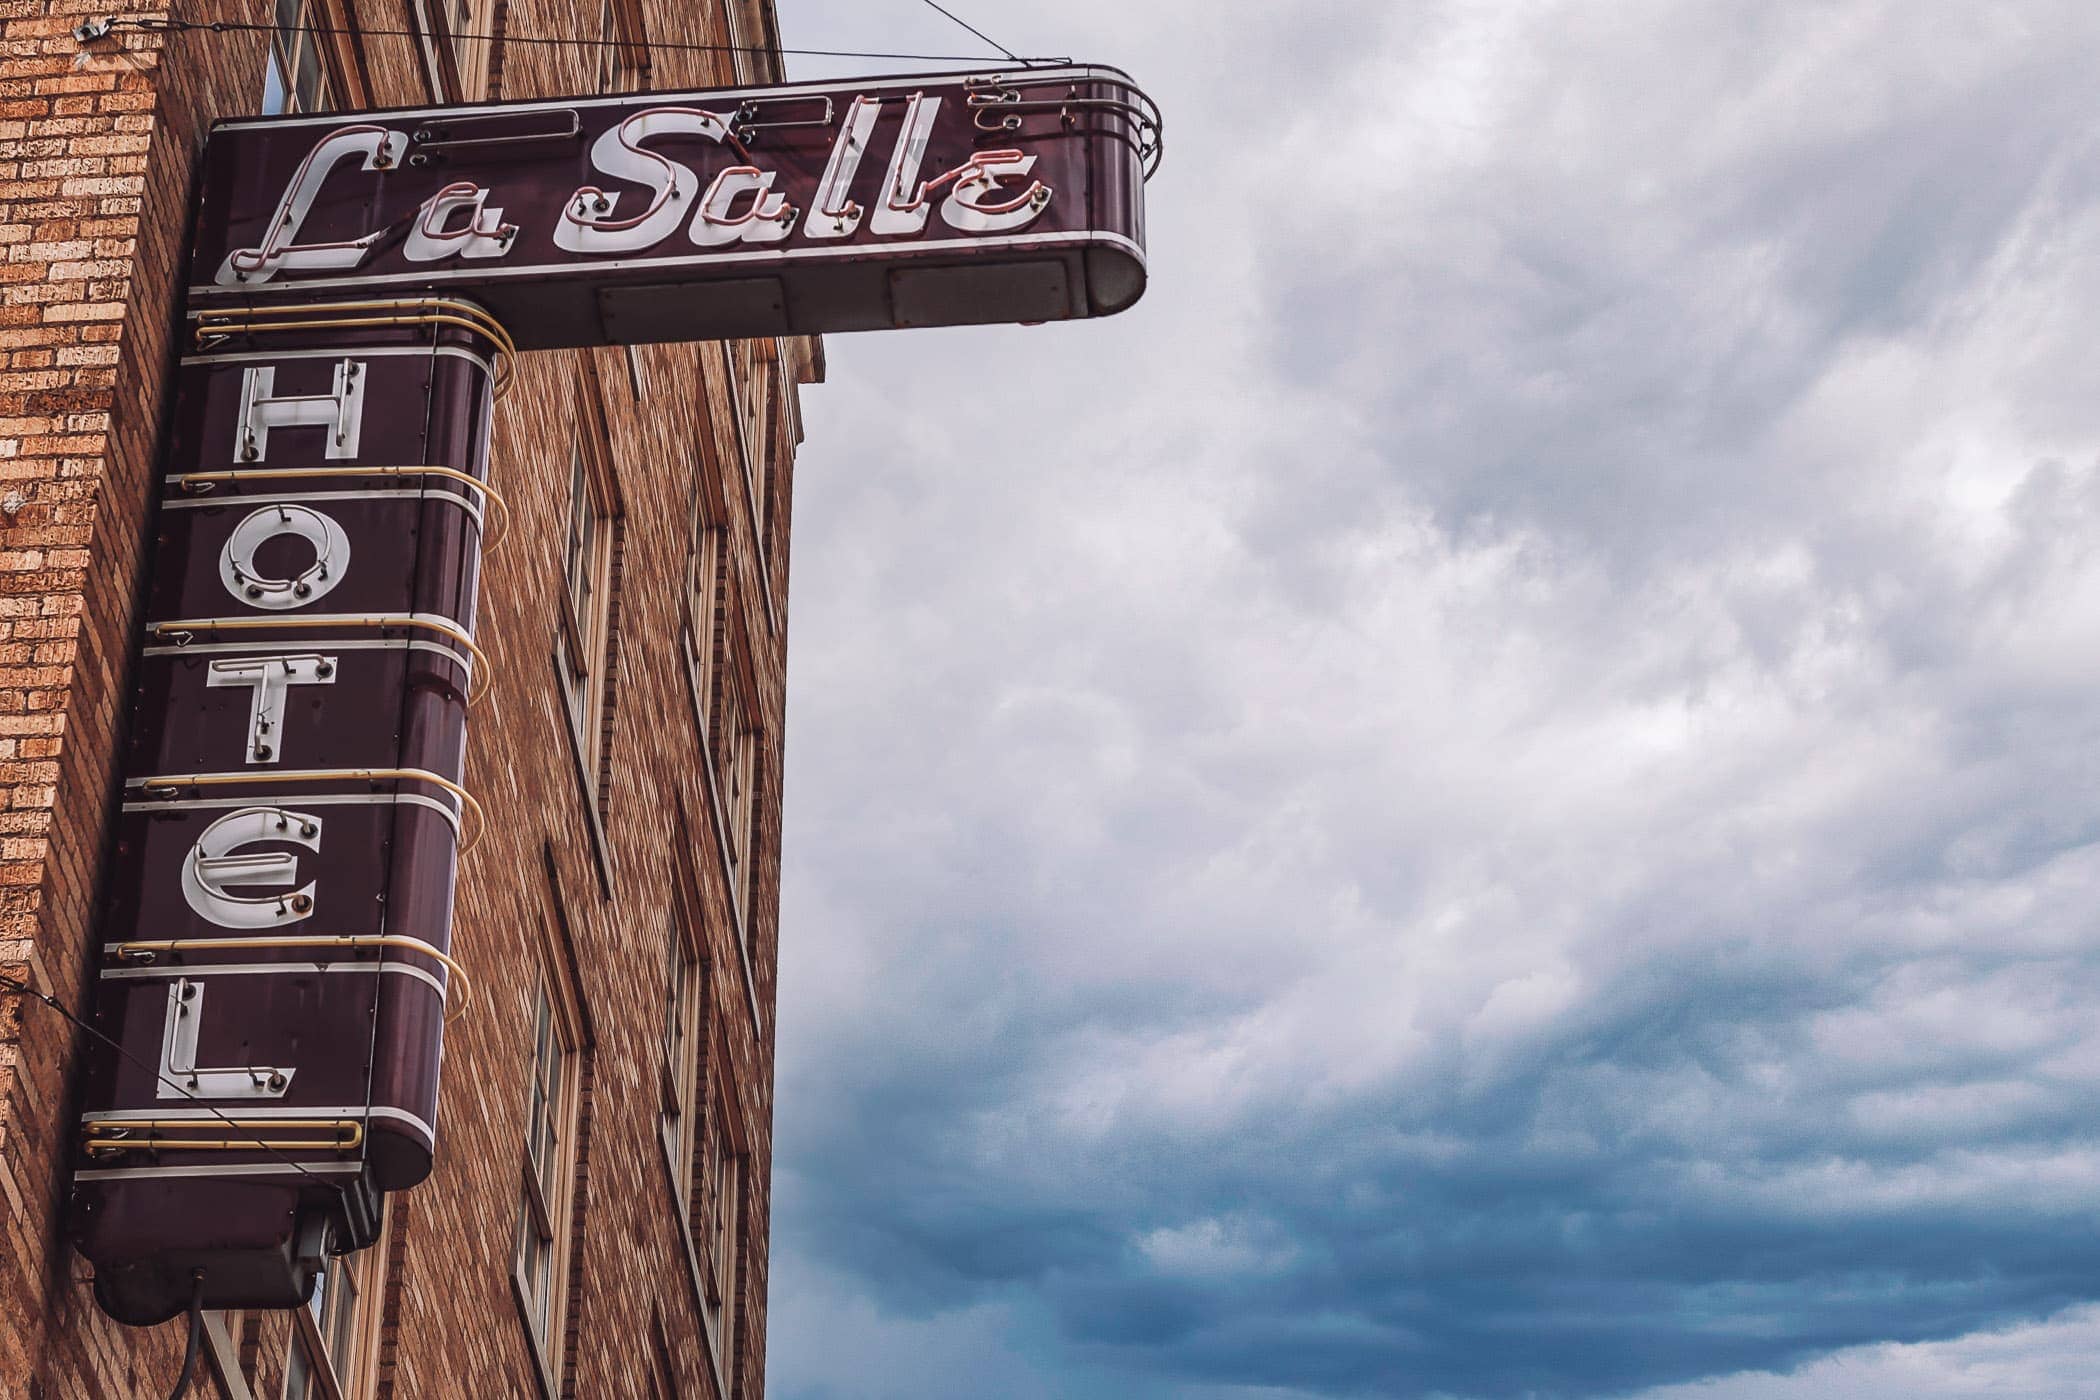 The sign of the La Salle Hotel in Downtown Bryan, Texas.